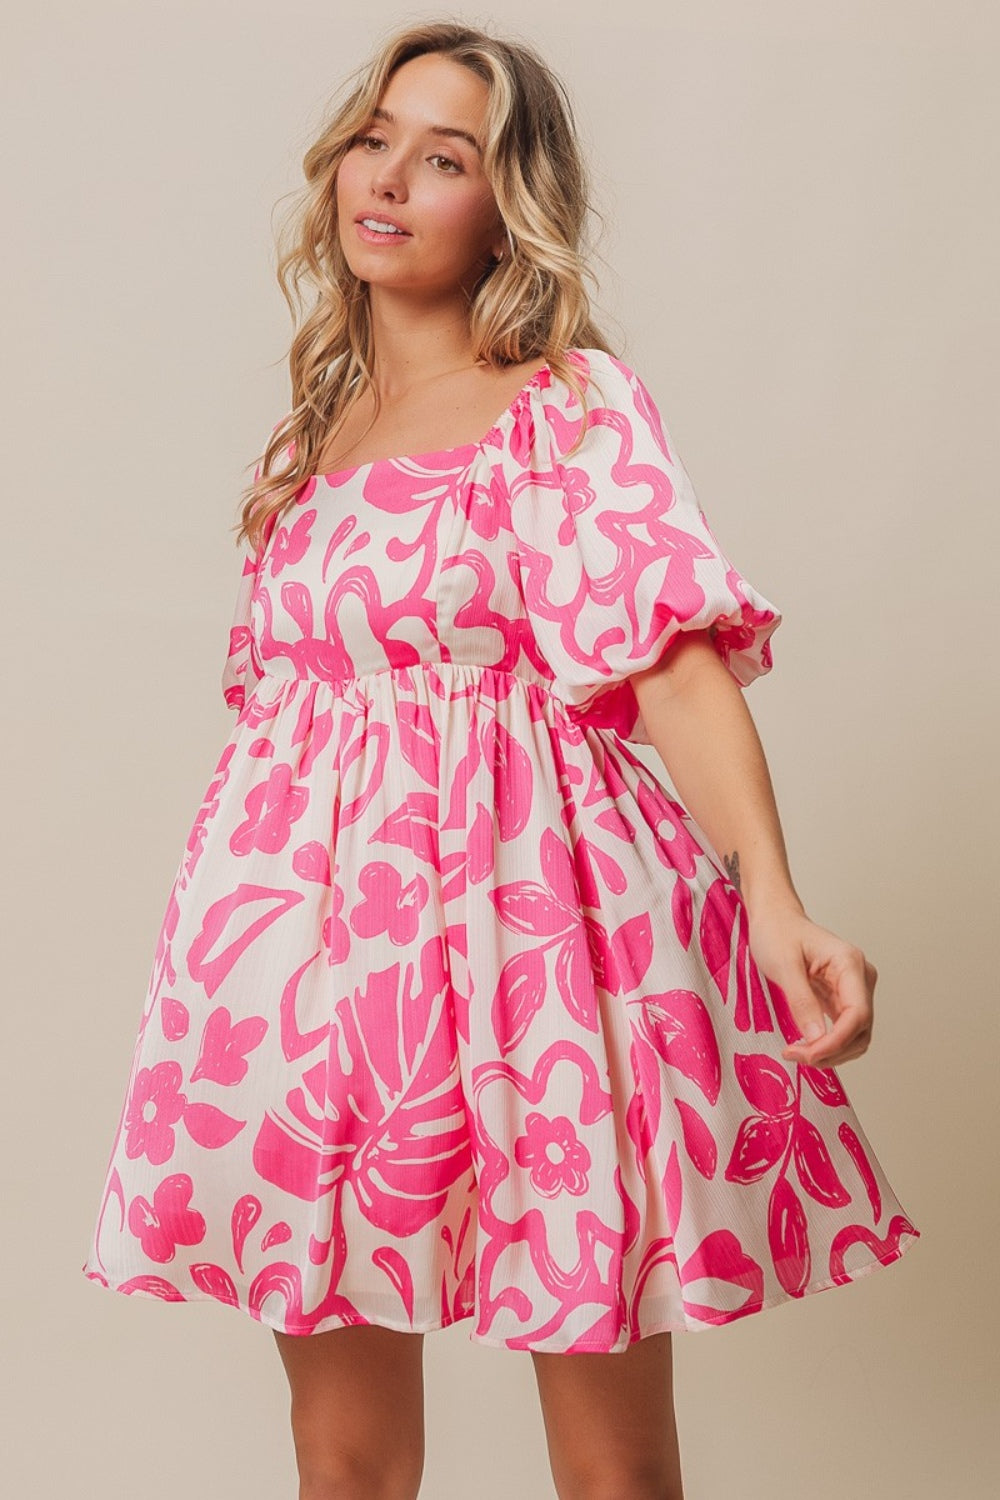 Living Life Fully Floral Dress